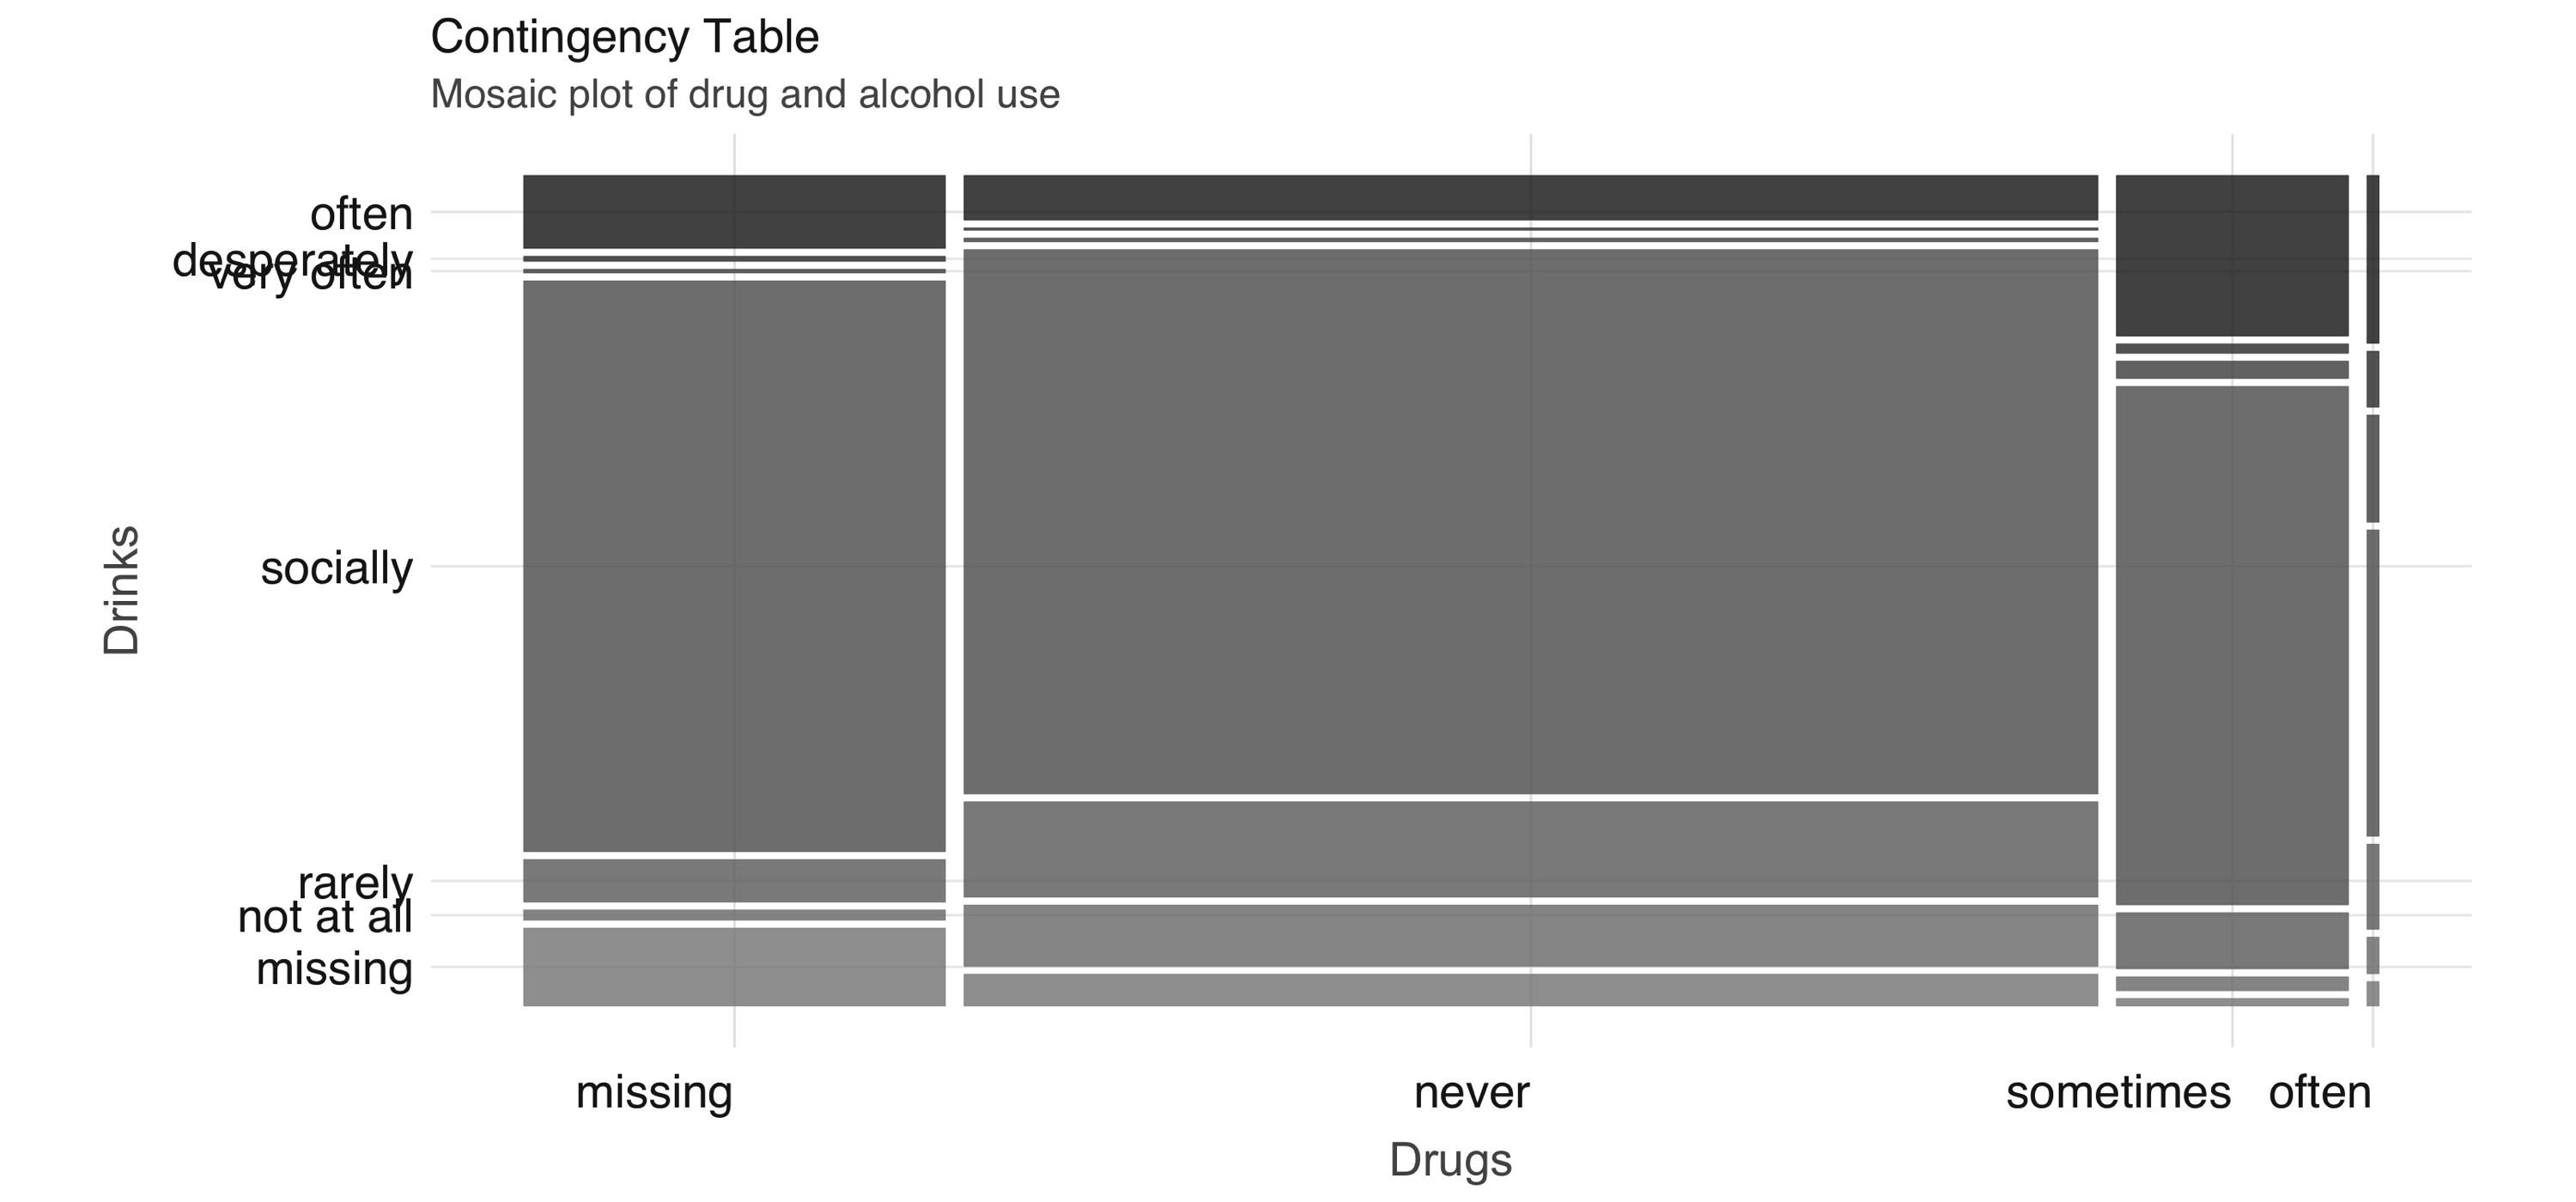 Mosaic plot of drug and alcohol use